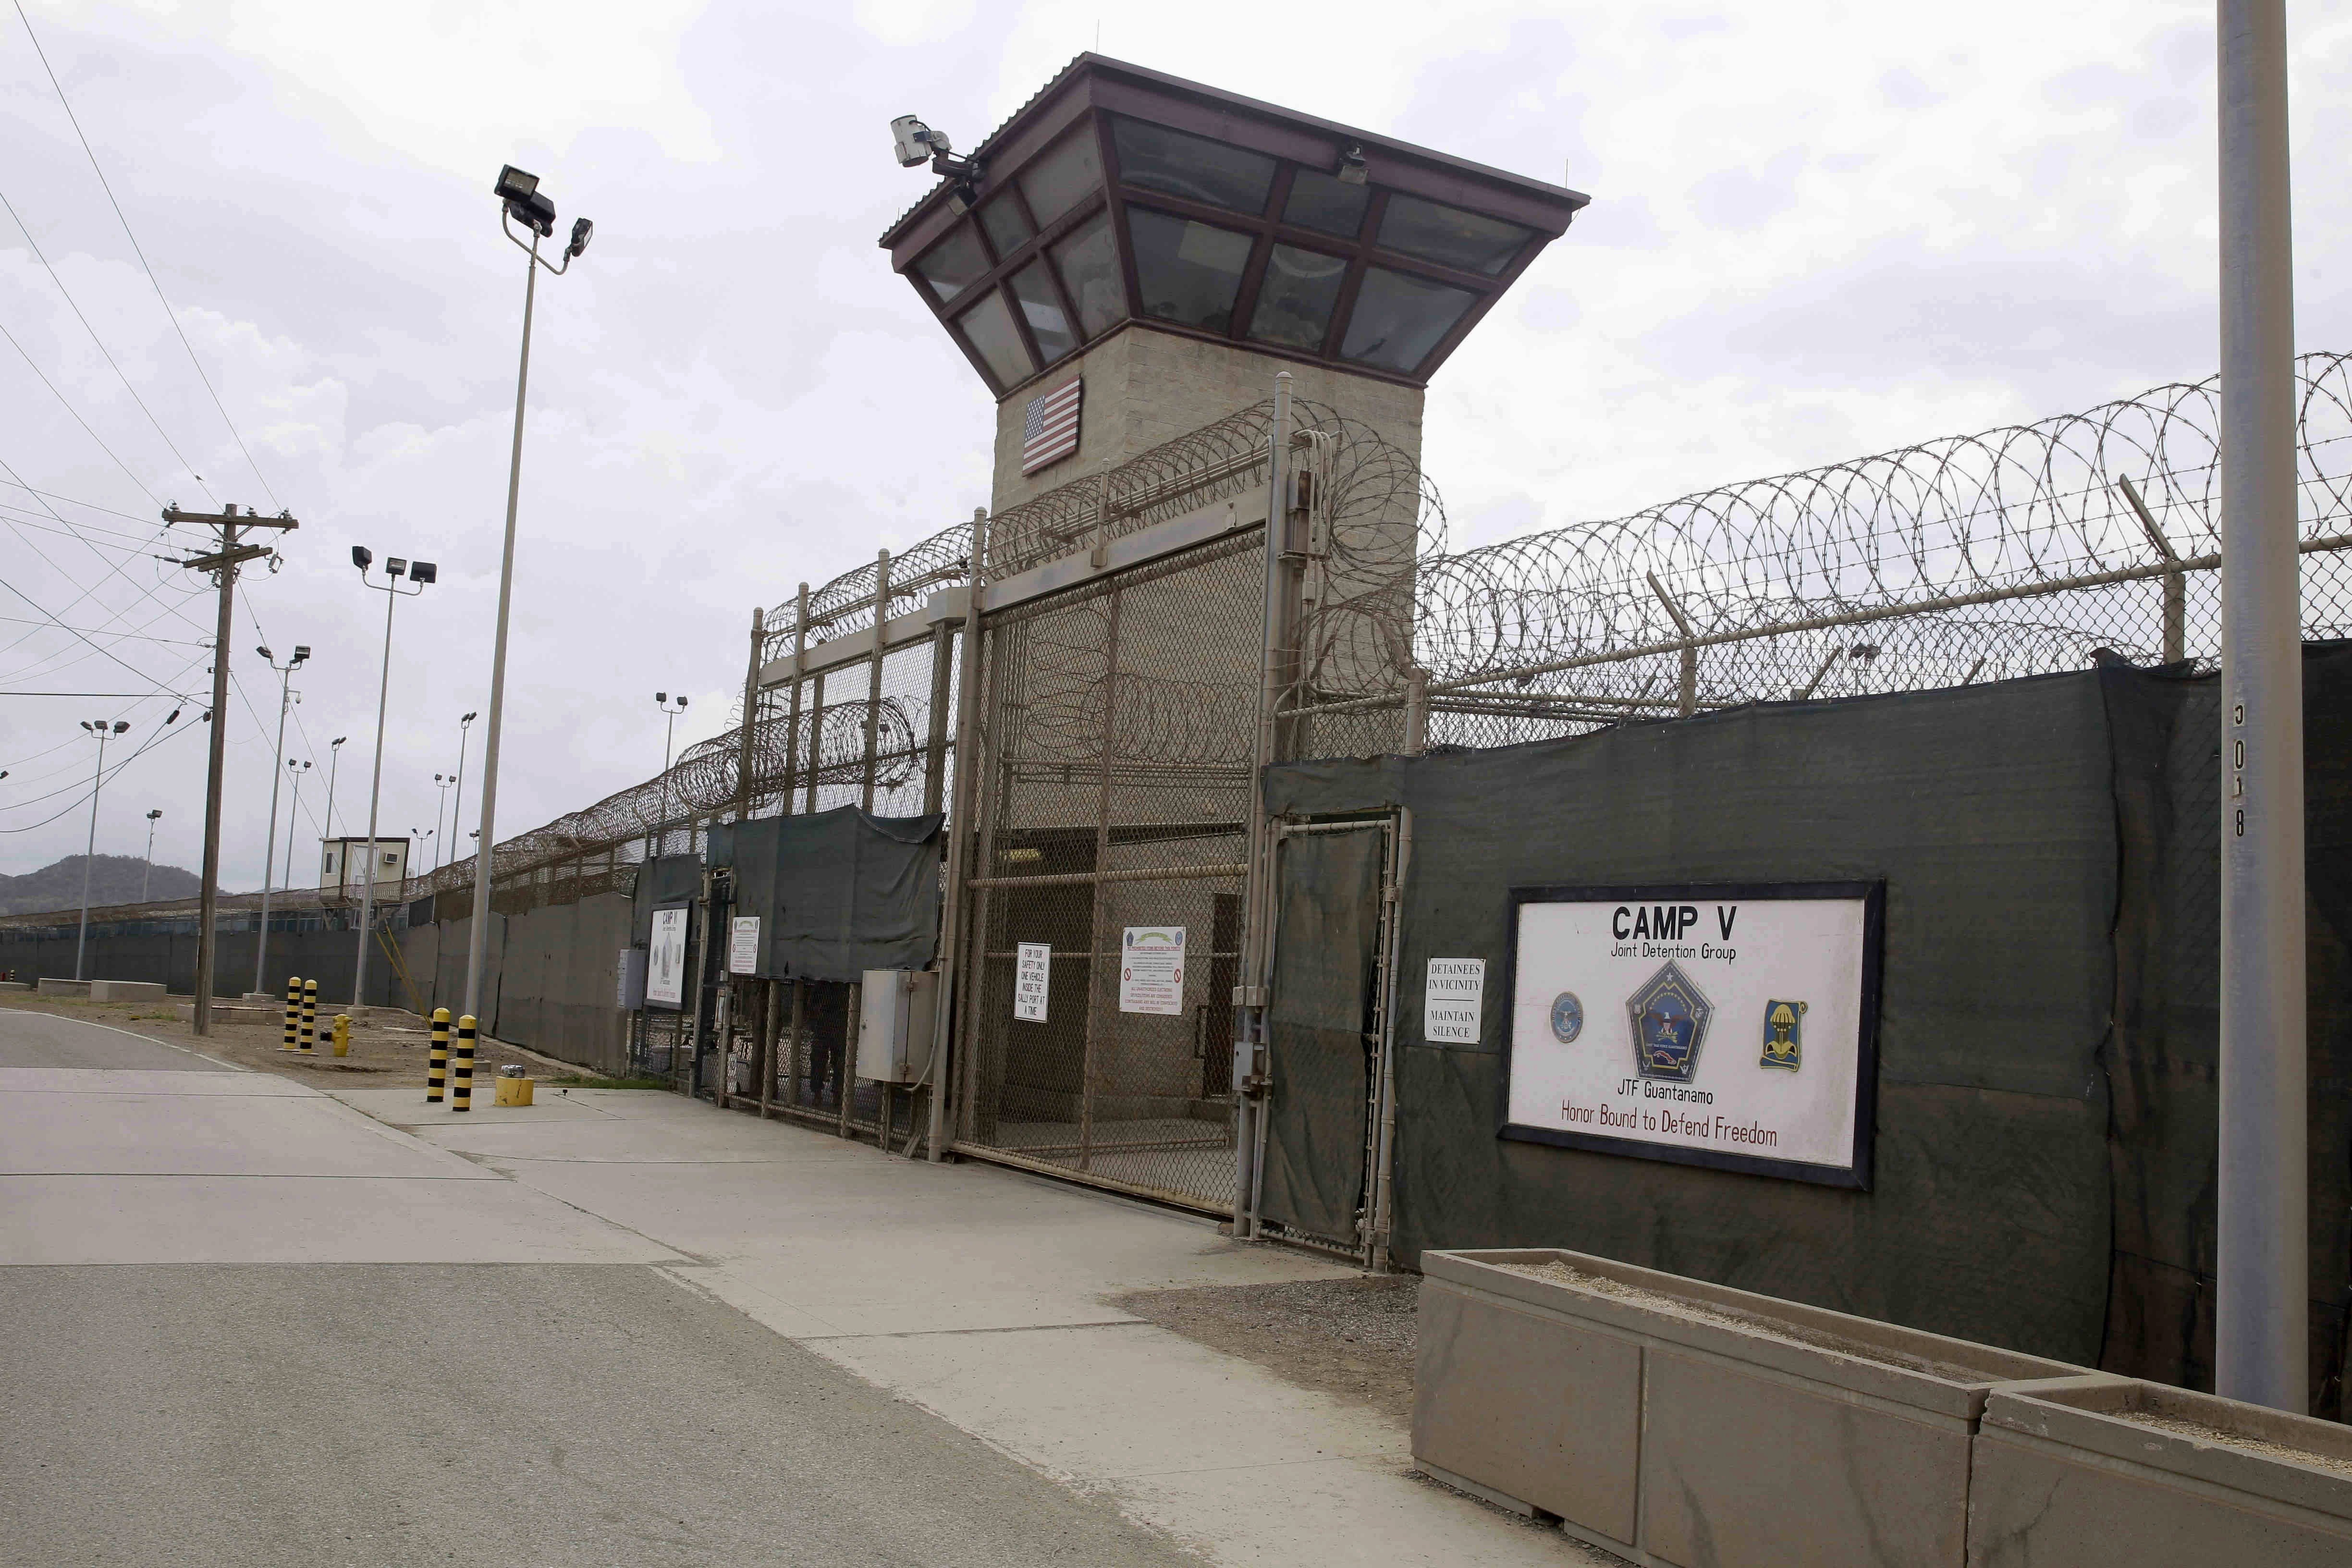 The entrance to Camp 5 and Camp 6 at Guantanamo Bay detention centre. Photo: AP